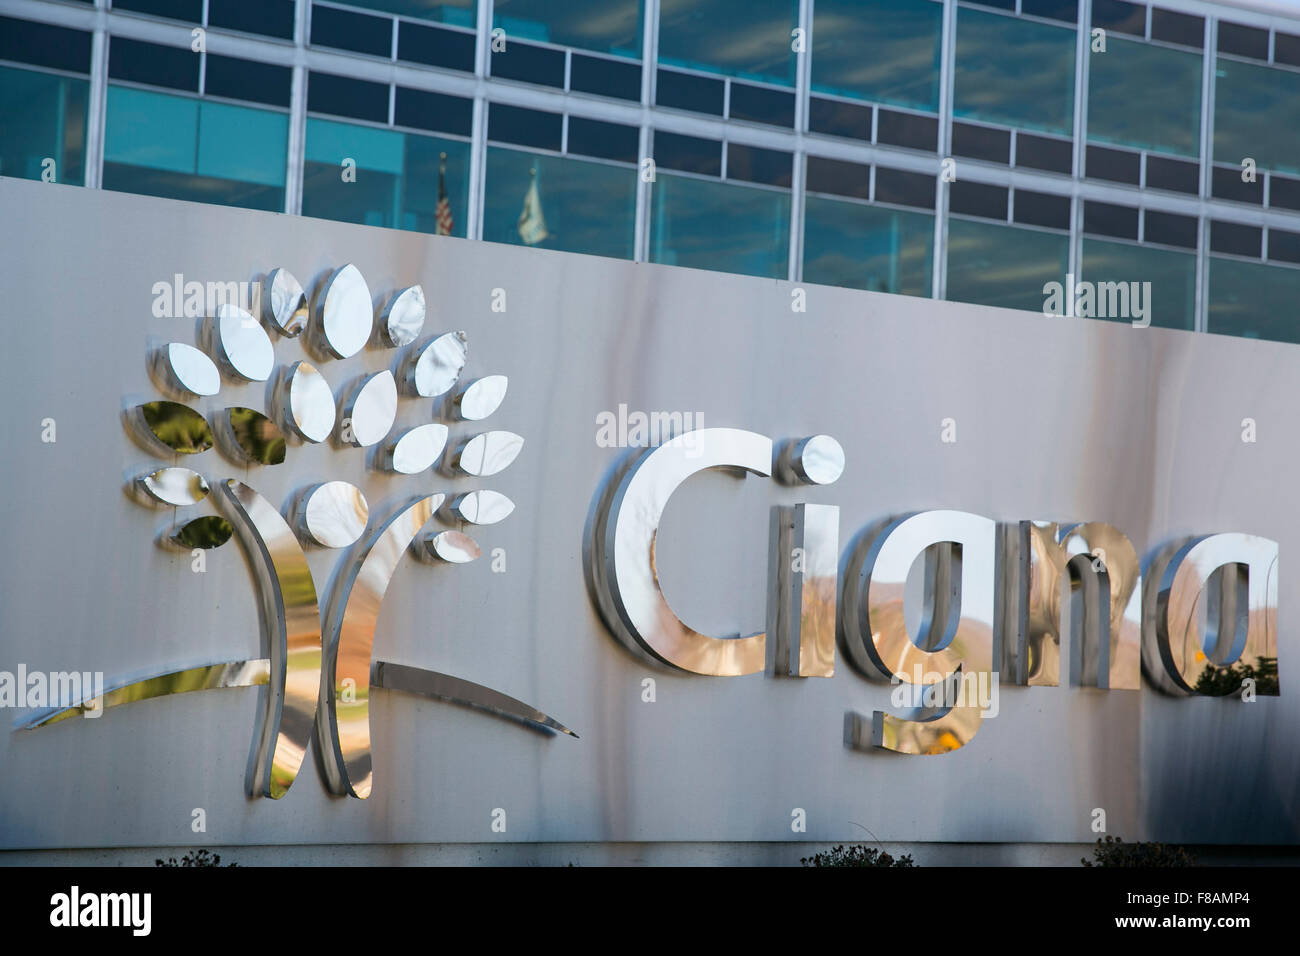 A logo sign outside of the headquarters of health insurer Cigna in Bloomfield, Connecticut on November 21, 2015. Stock Photo